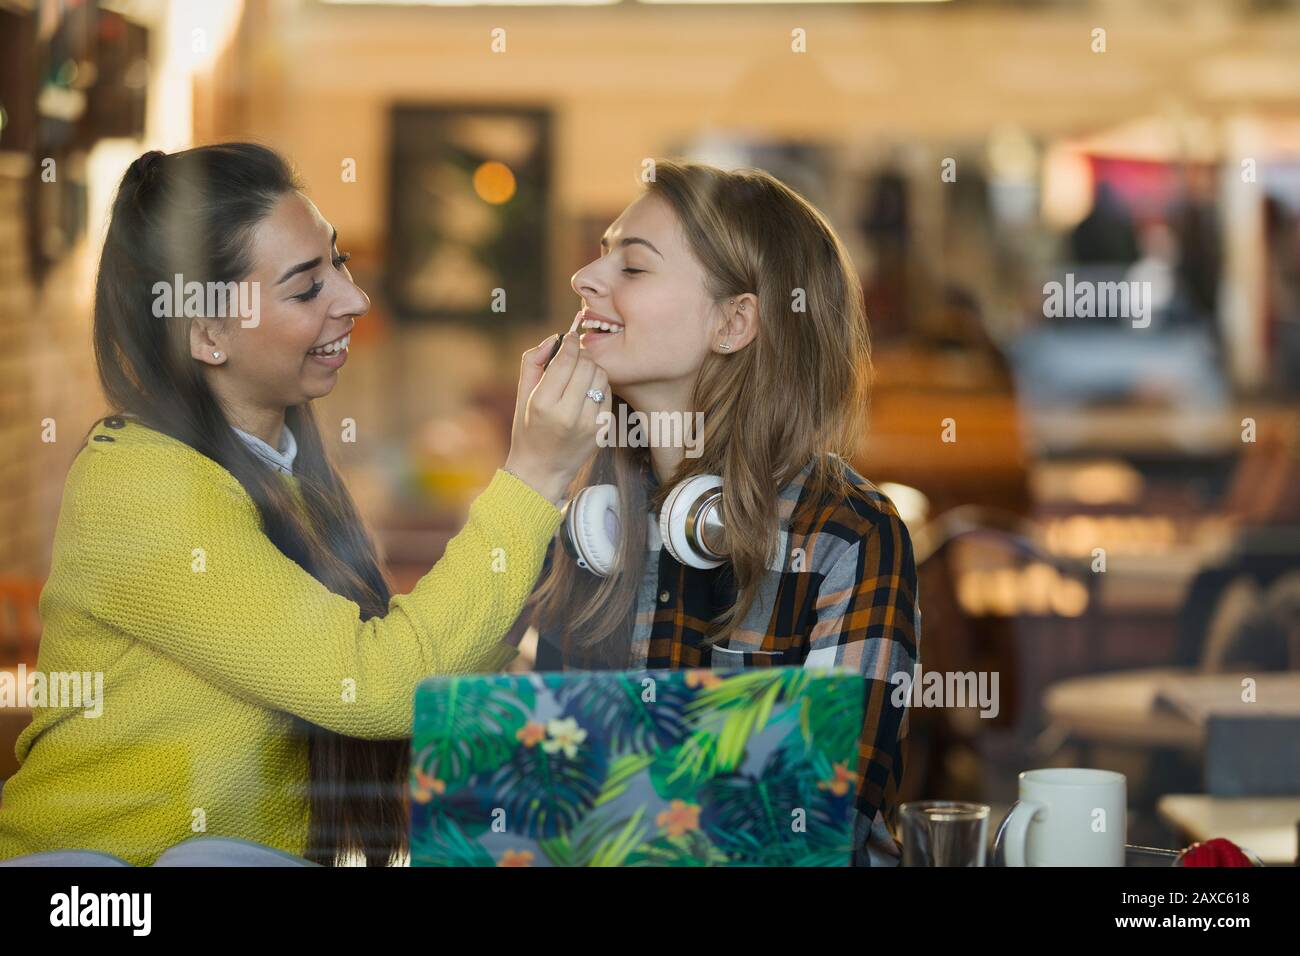 Young woman applying lip gloss to friends lips in cafe window Stock Photo